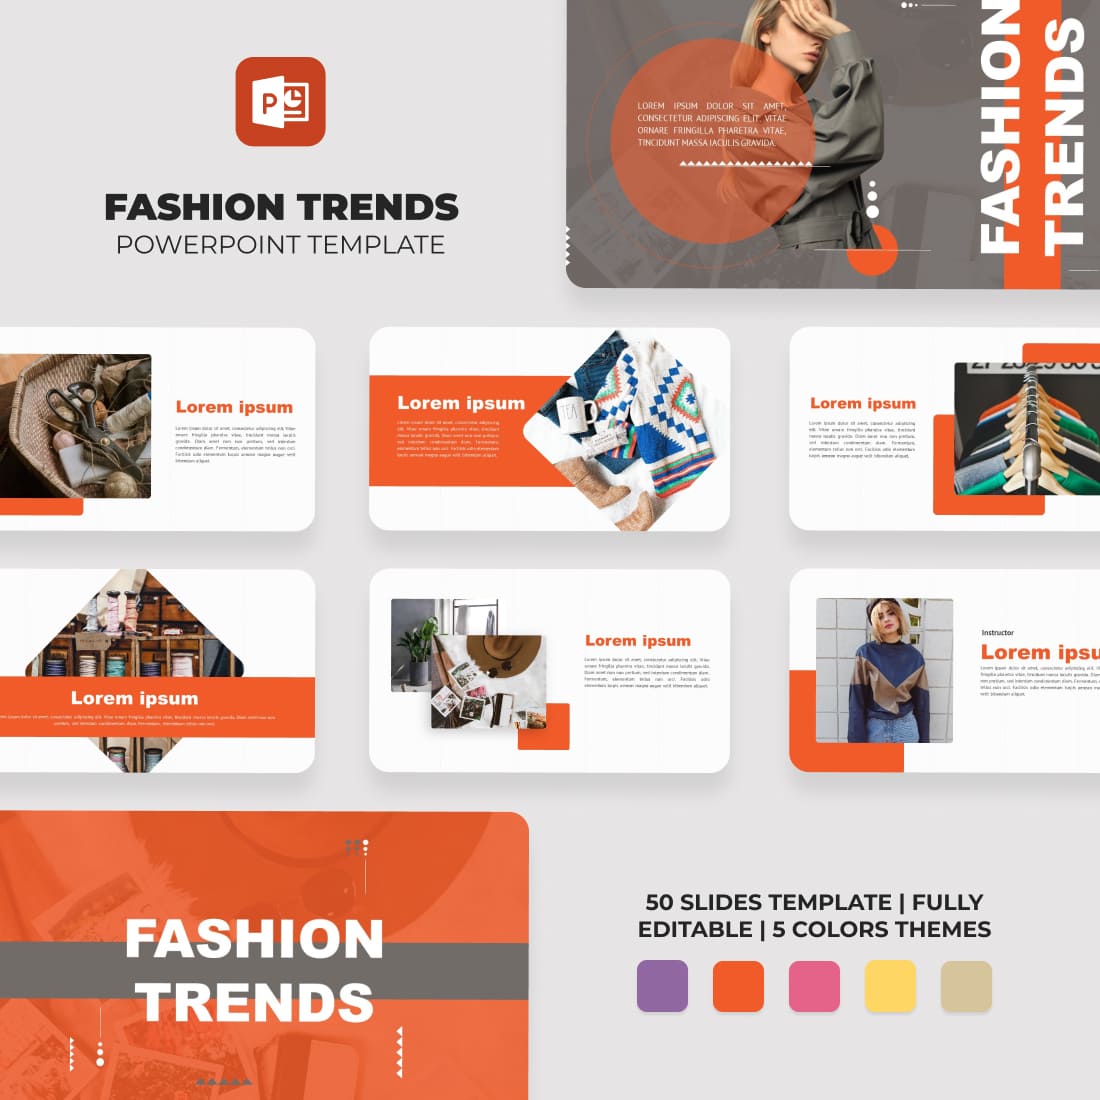 Fashion Trends Powerpoint Template.